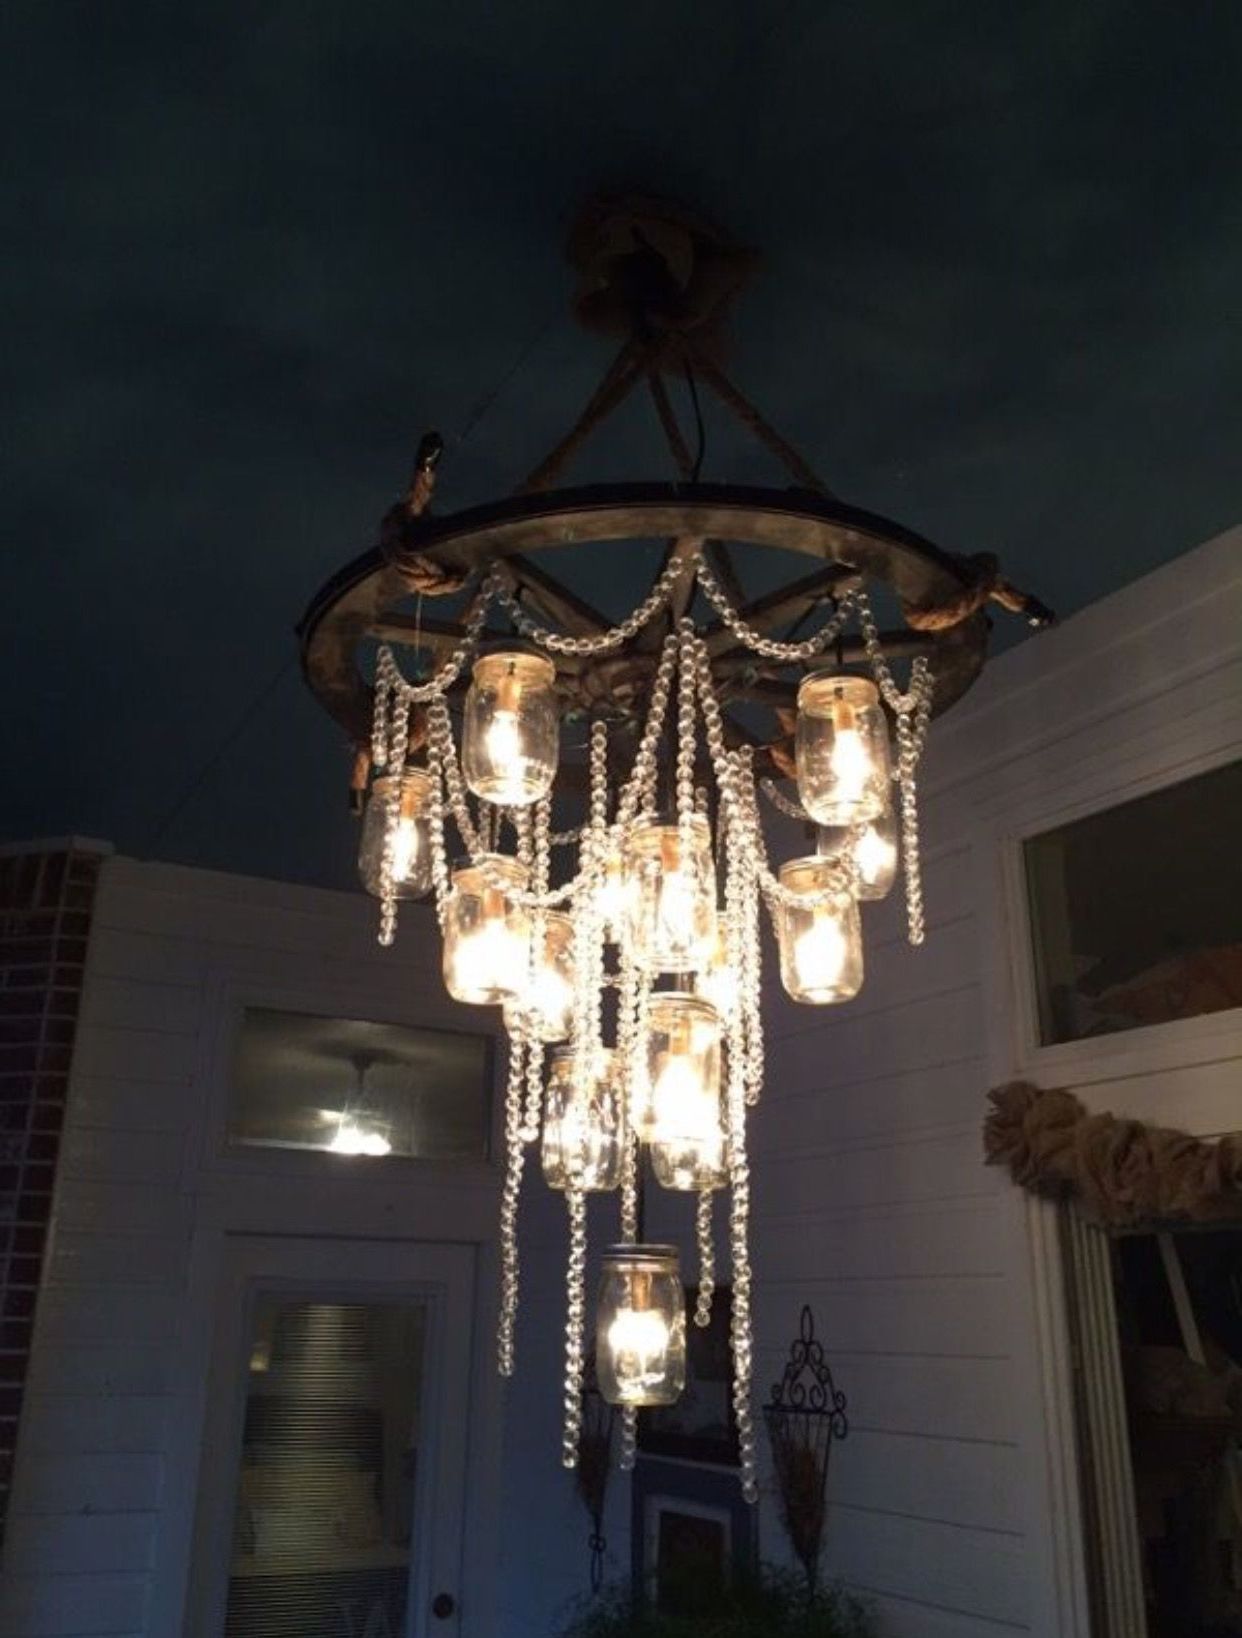 Well Known Wagon Wheel Chandelier With Mason Jars & Strings Of Regarding Wagon Wheel Chandeliers (View 15 of 15)